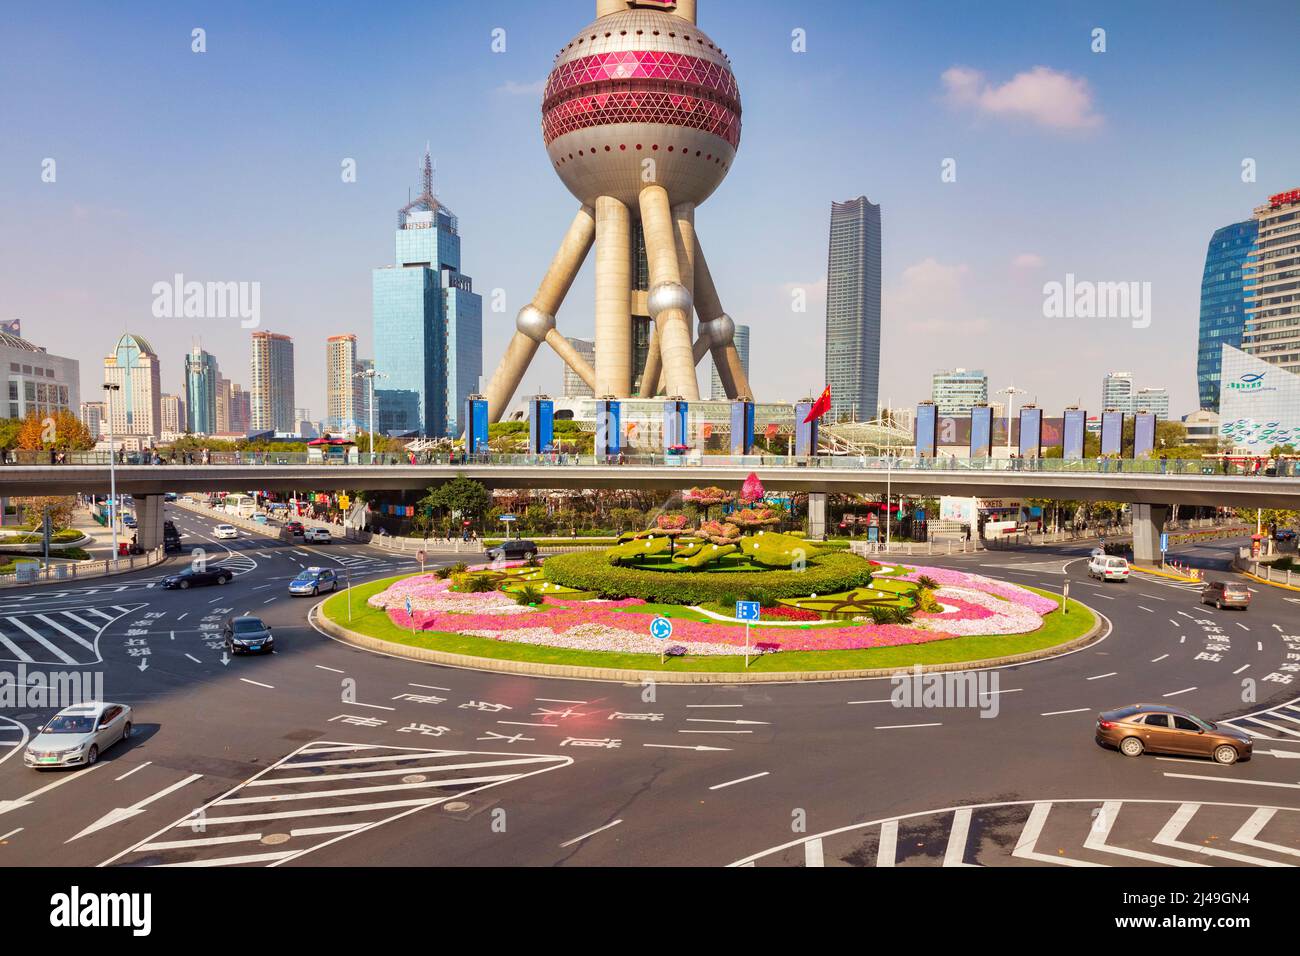 1 December 2018: Shanghai, China - A view of the Pudong district, with the Oriental Pearl Tower, and a large roundabout with topiary in the middle. Stock Photo